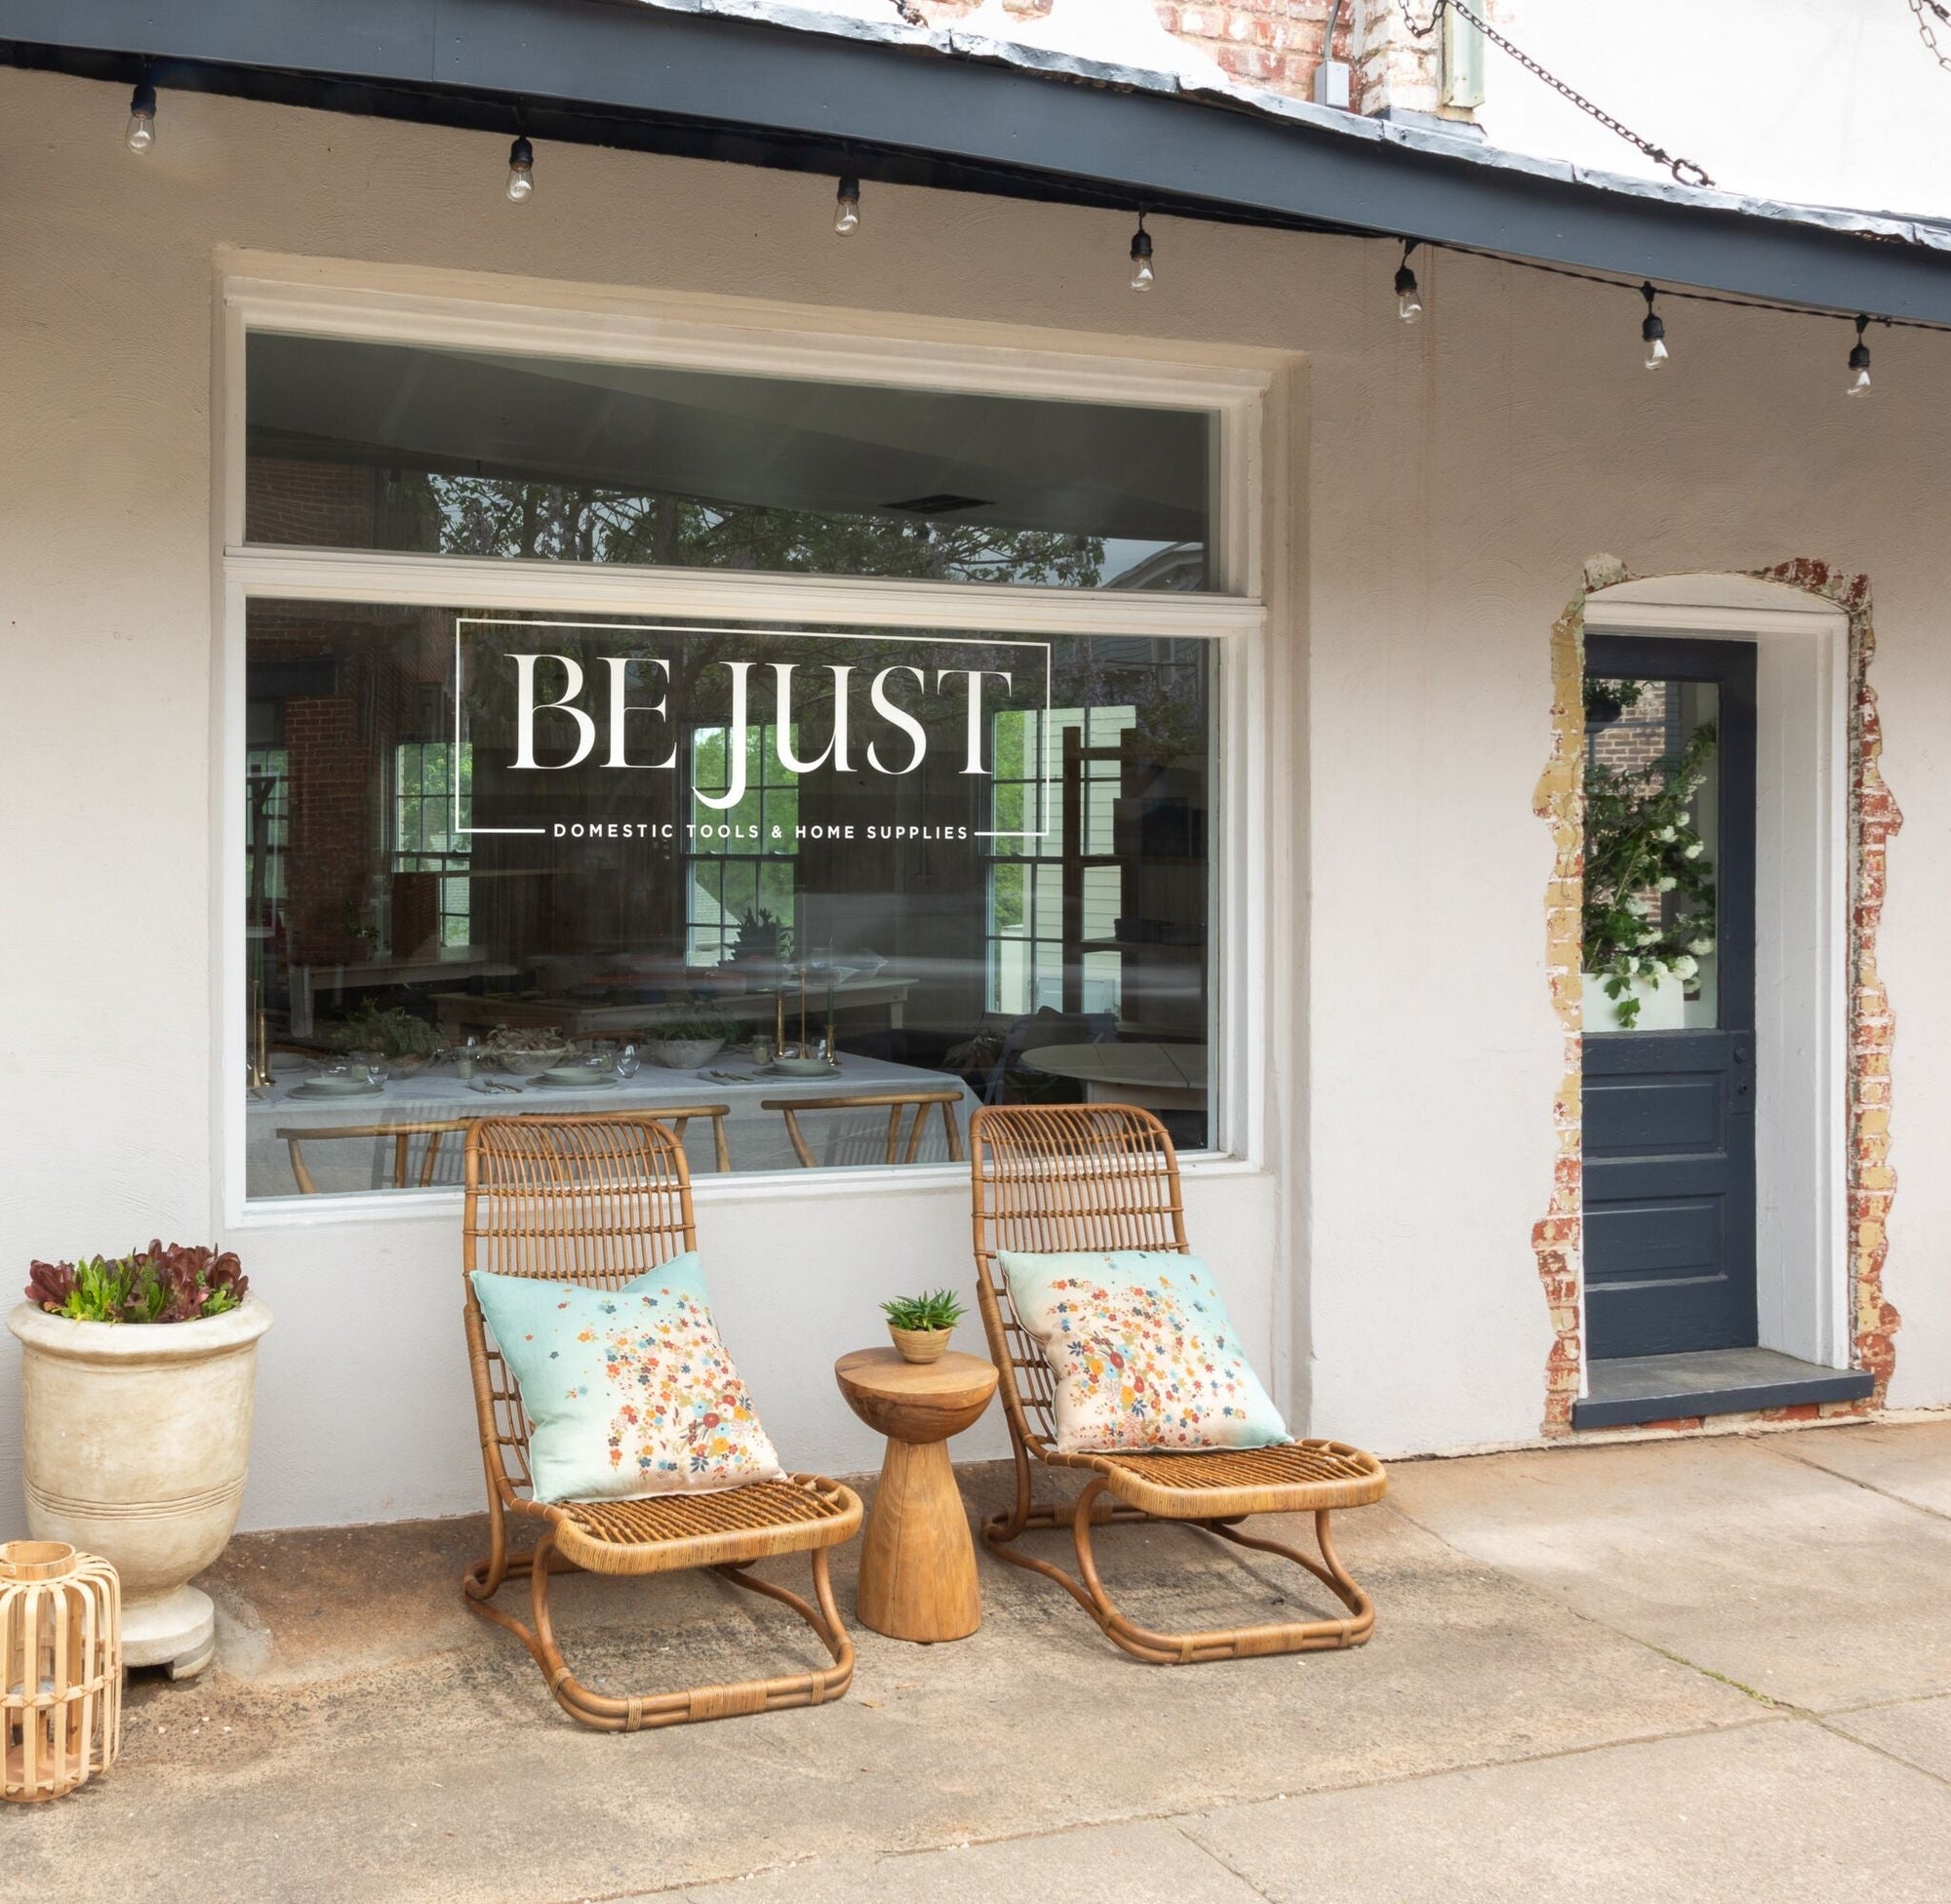 Where to Go? What to Eat? In Charlottesville, VA with Be Just